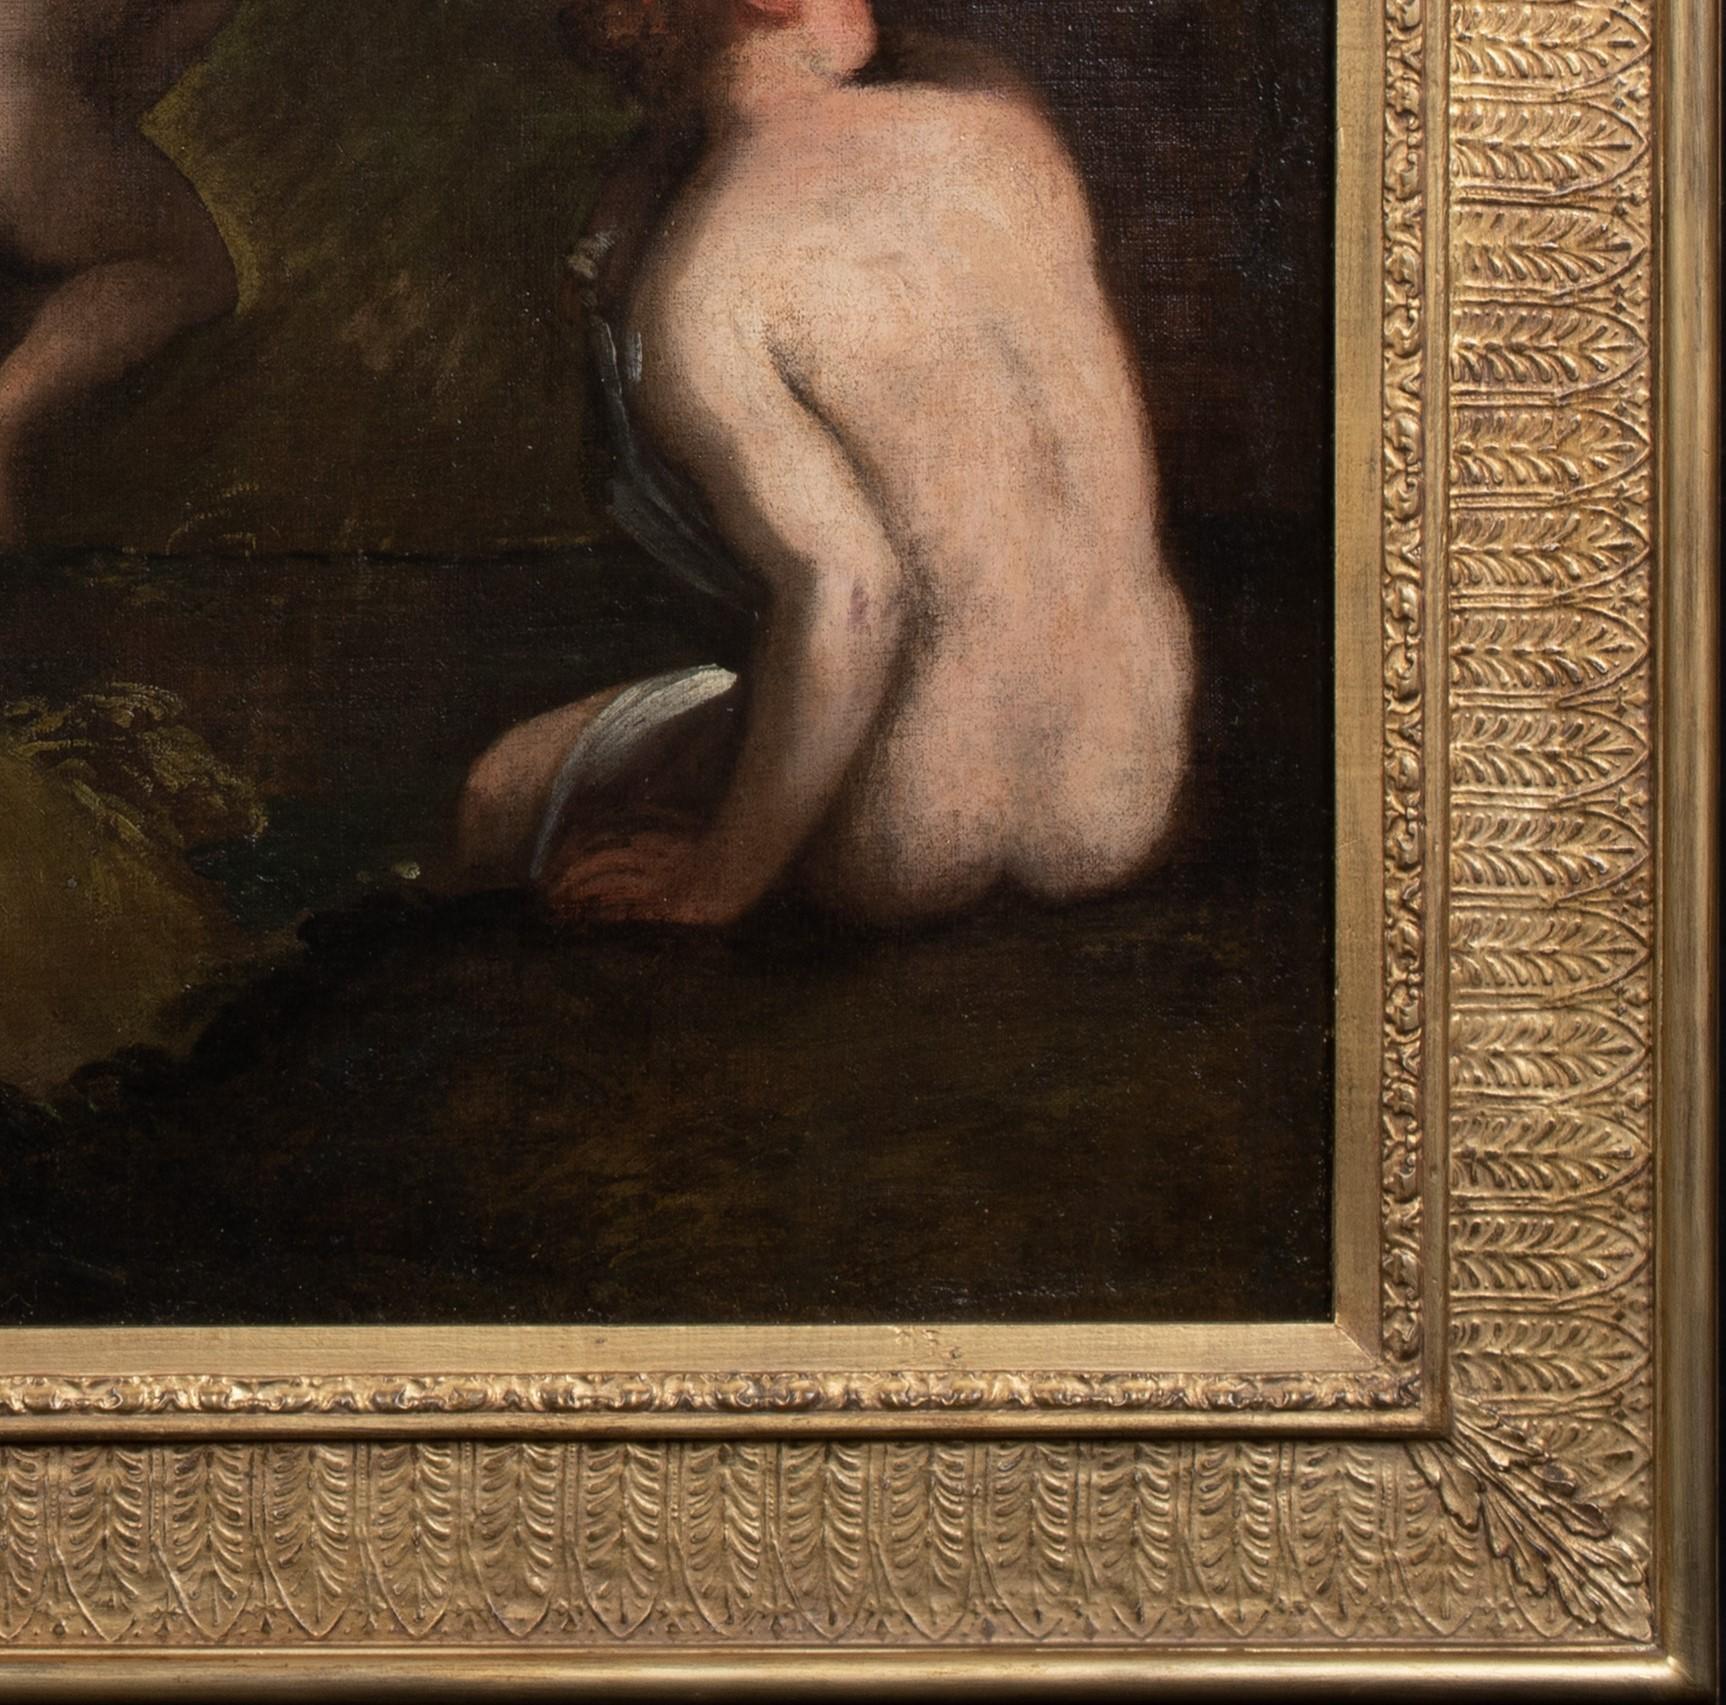 Nudes Bathing in A Landscape, 16th/17th Century - Black Portrait Painting by Unknown